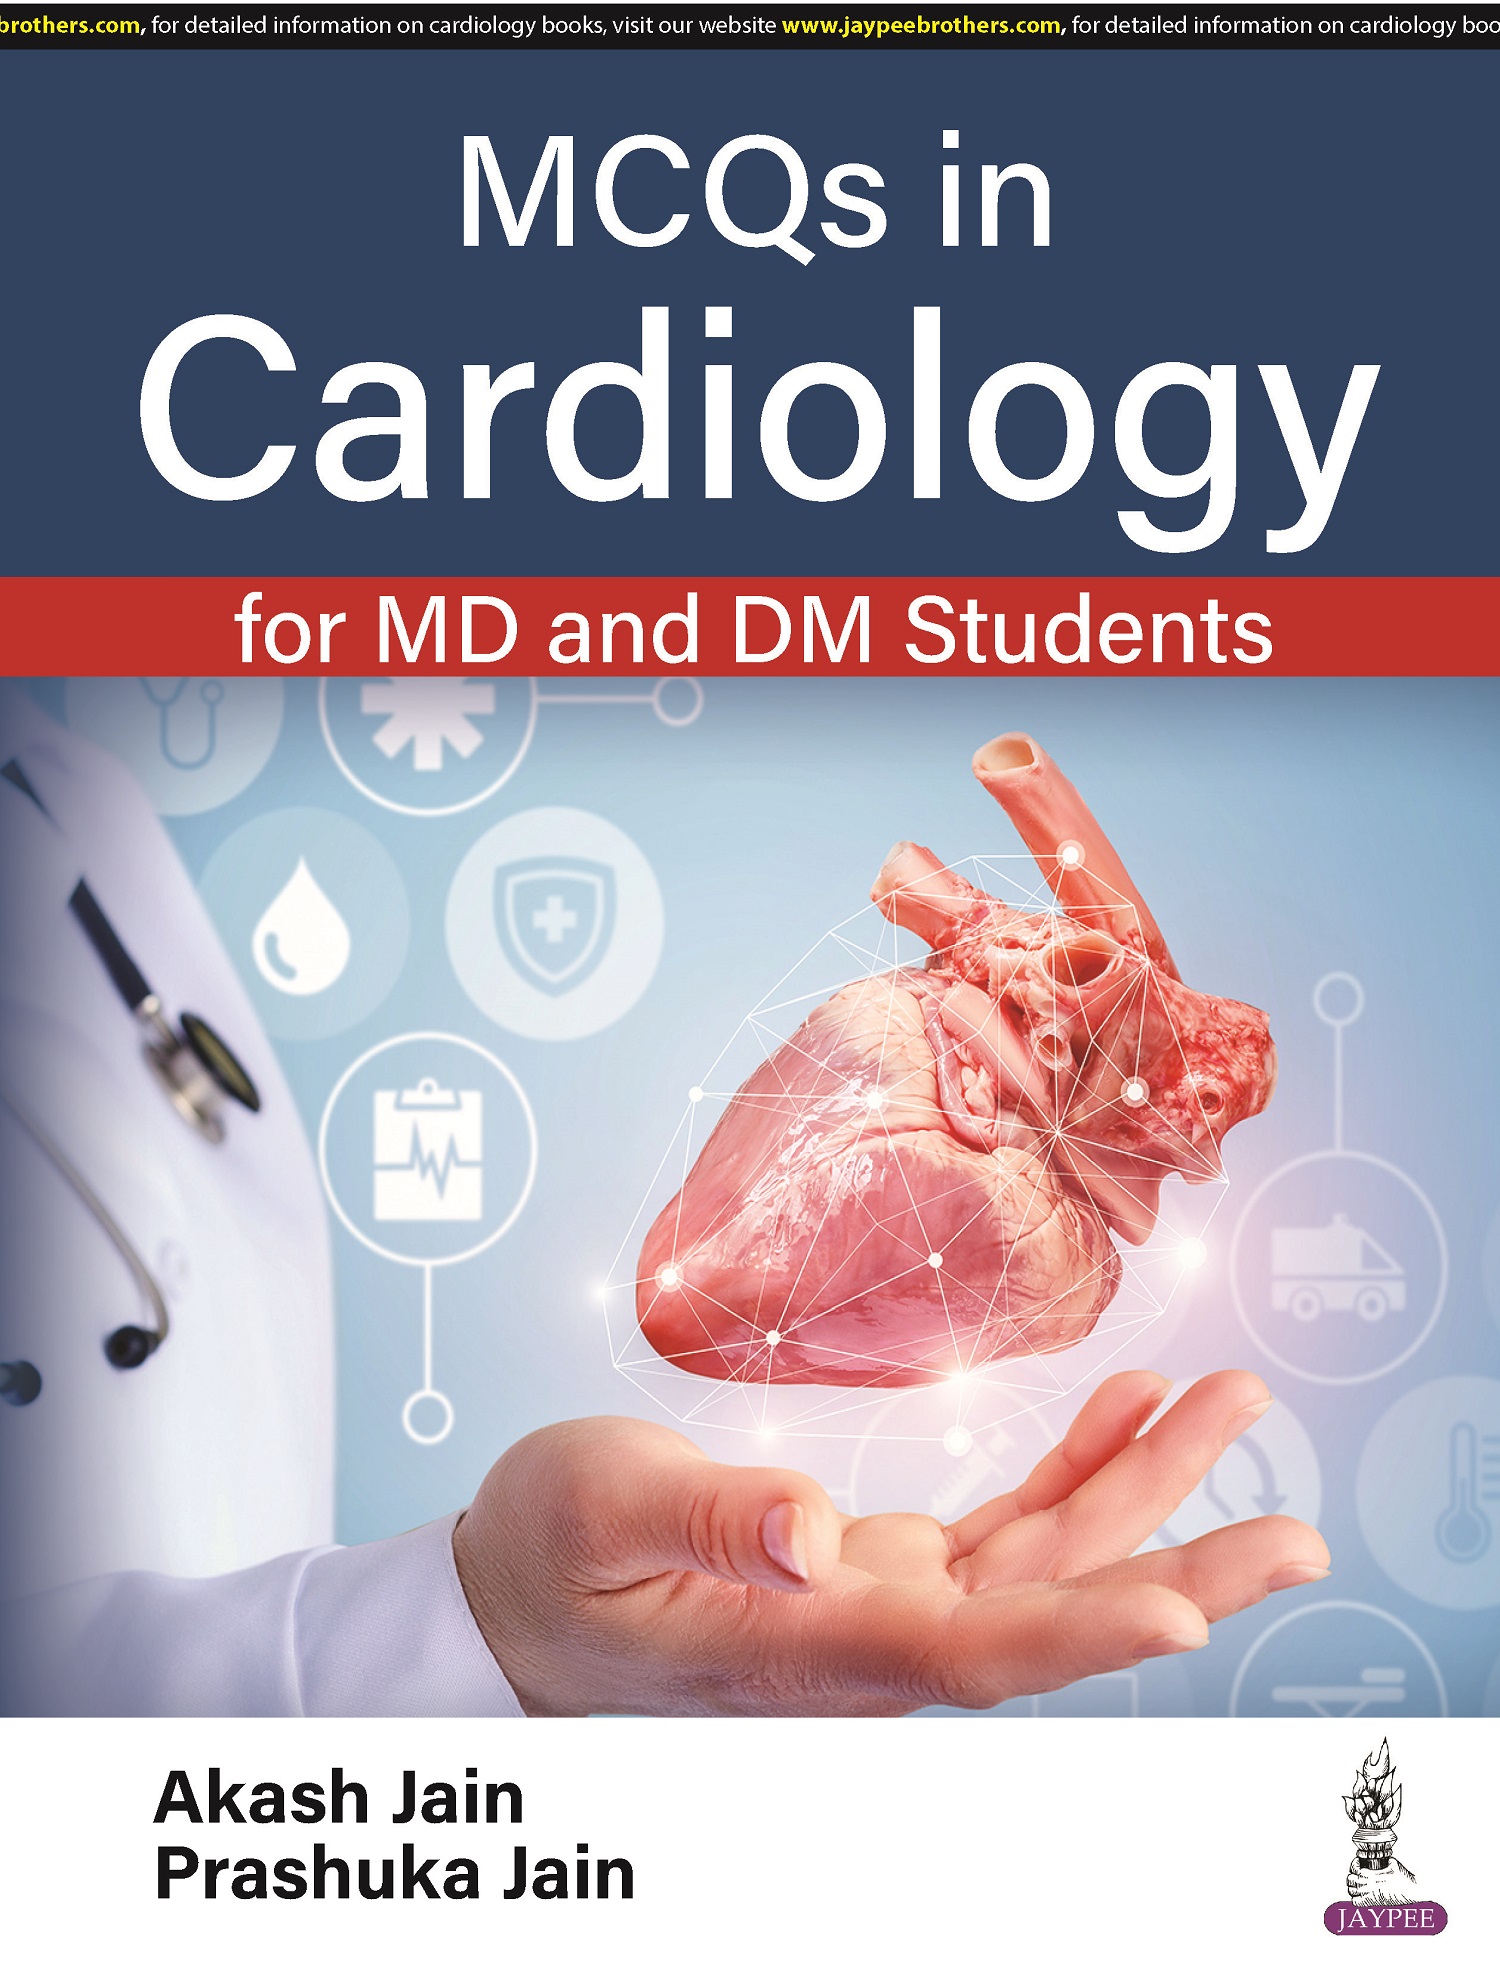 MCQs in Cardiology for MD and DM Students